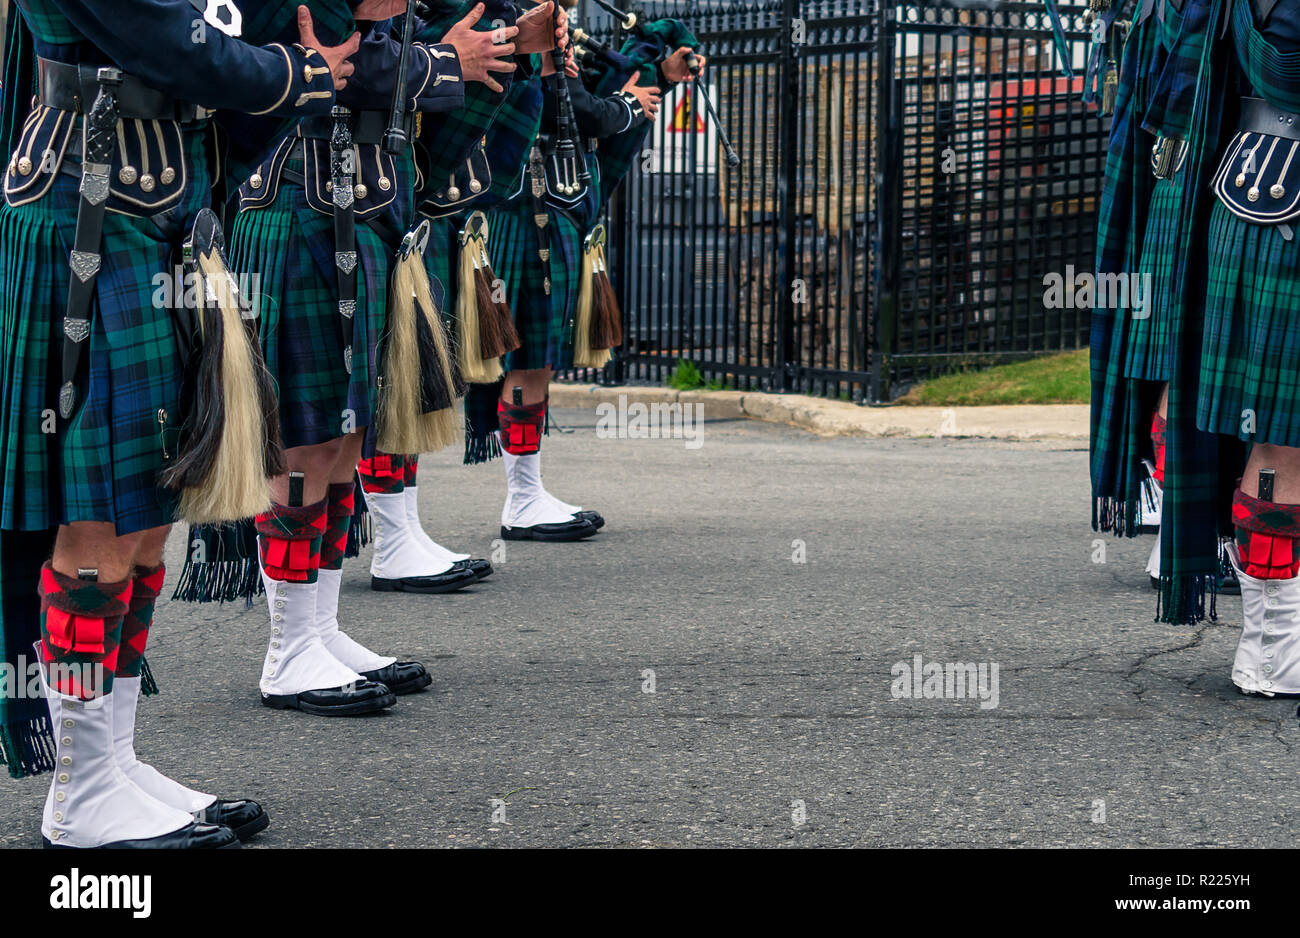 Caucasian men wearing the traditional Scottish kilt and playing the bagpipe during the changing of the guard at the Ottawa Parliament, Canada Stock Photo